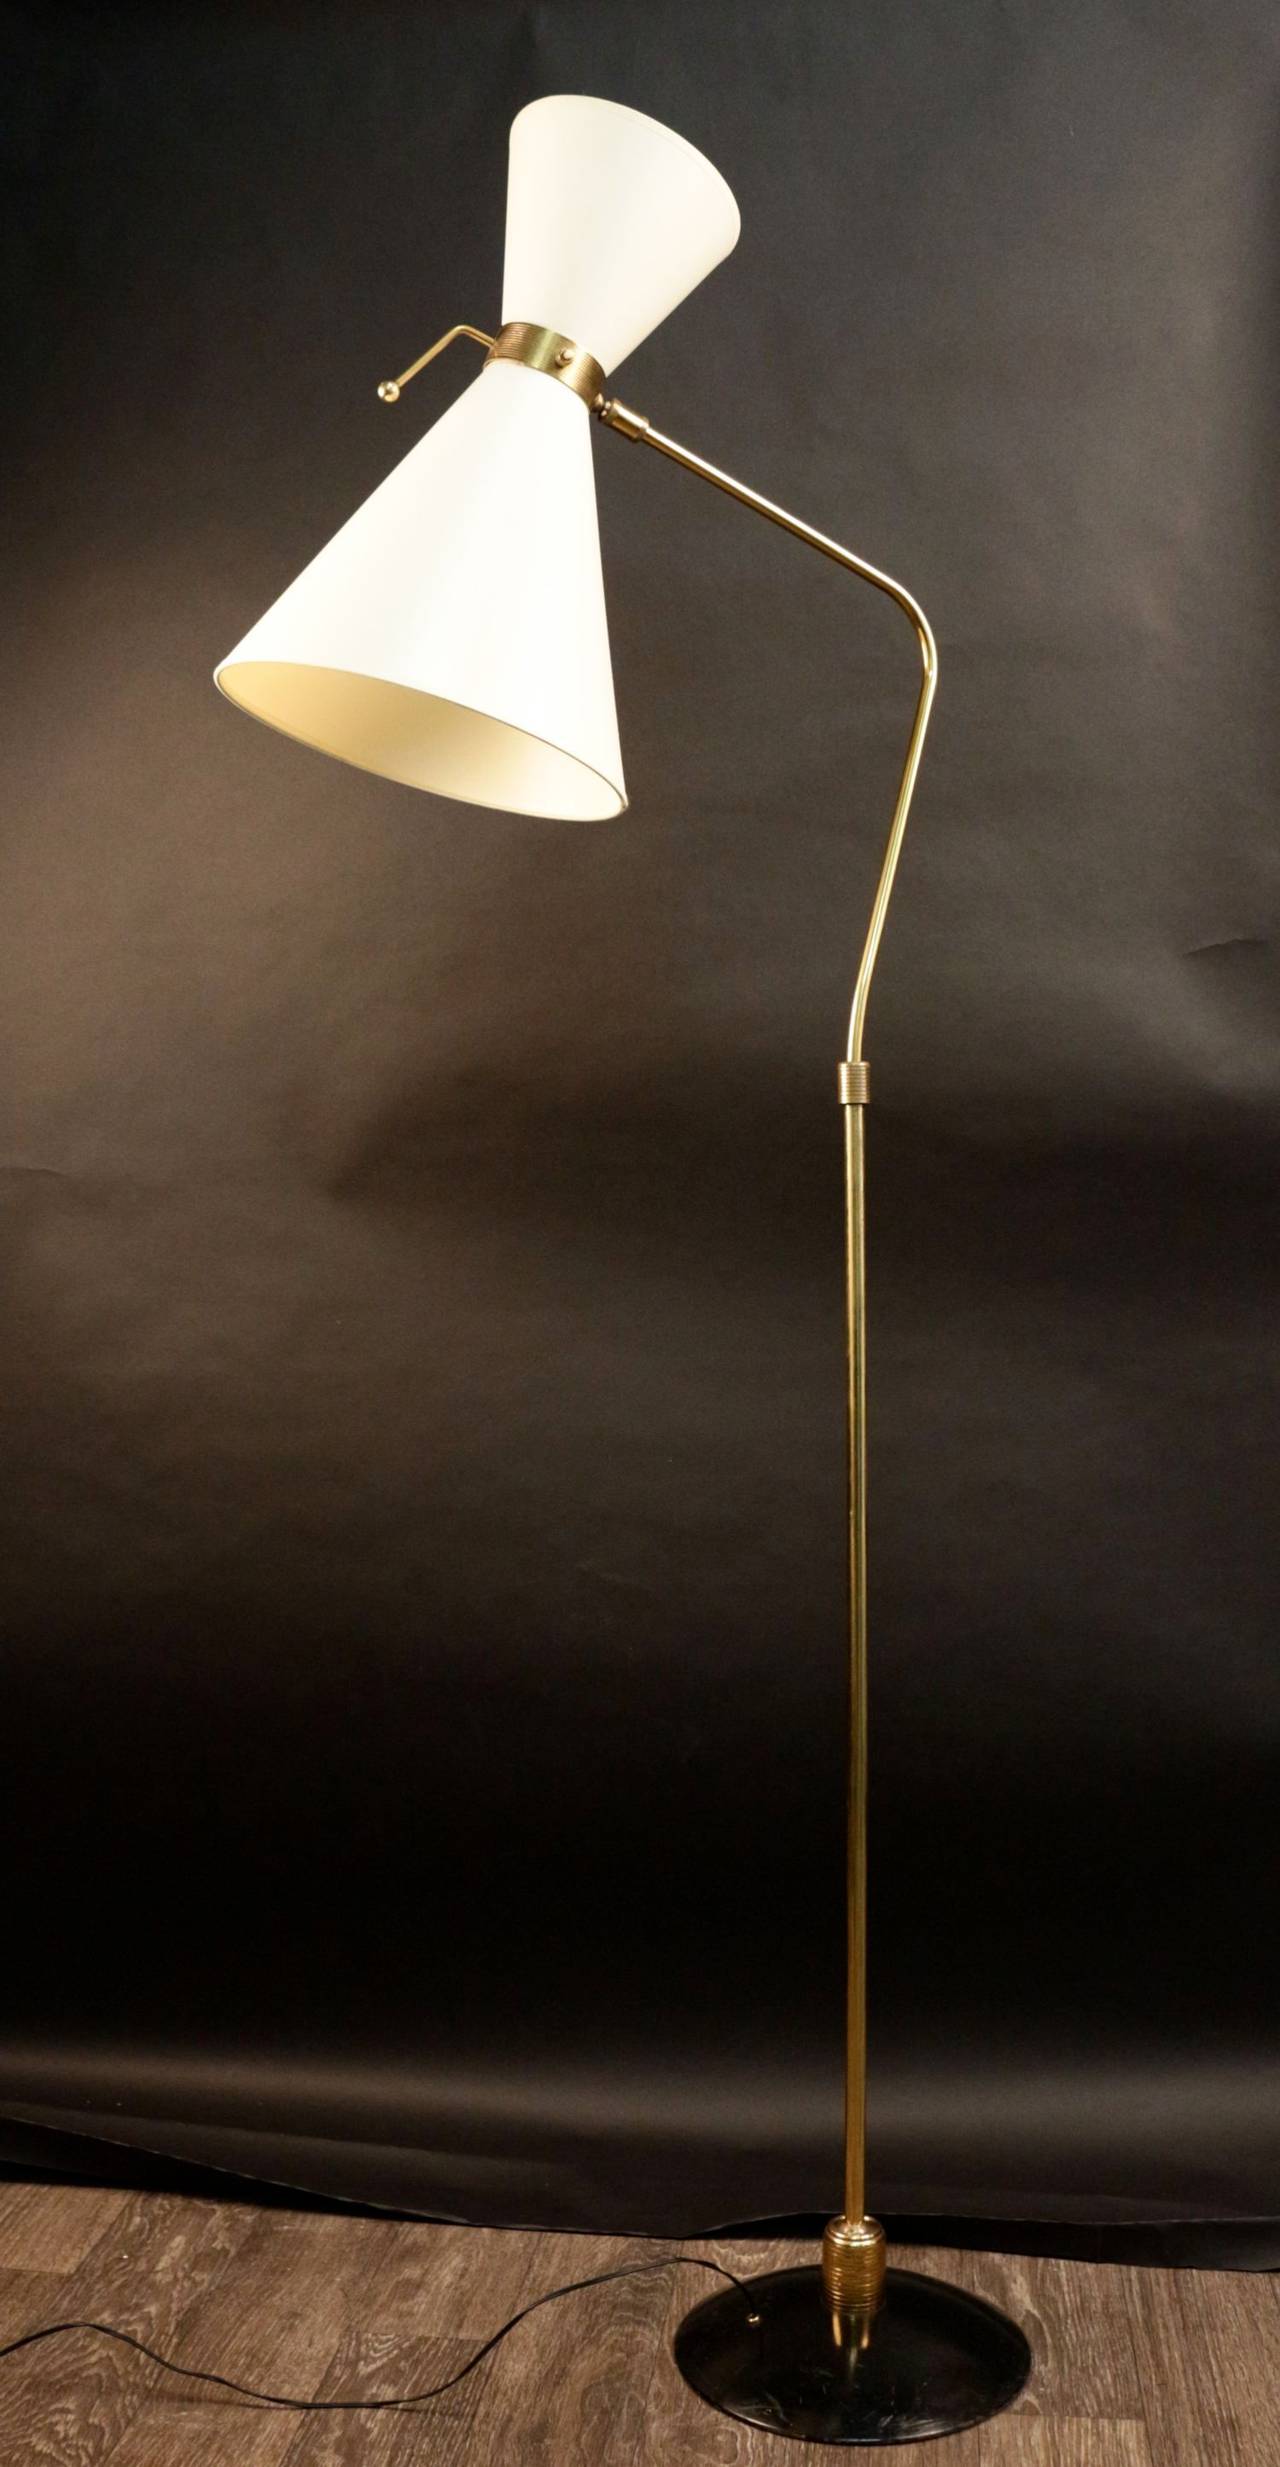 1950s floor lamp by Maison Lunel.
The double lampshade (two bulbs) is ball gear mounted. A handle allows freely orientation. 
Brass rod is also ball gear mounted and is ending with a round base in black lacquered metal.
Lampshade redone according